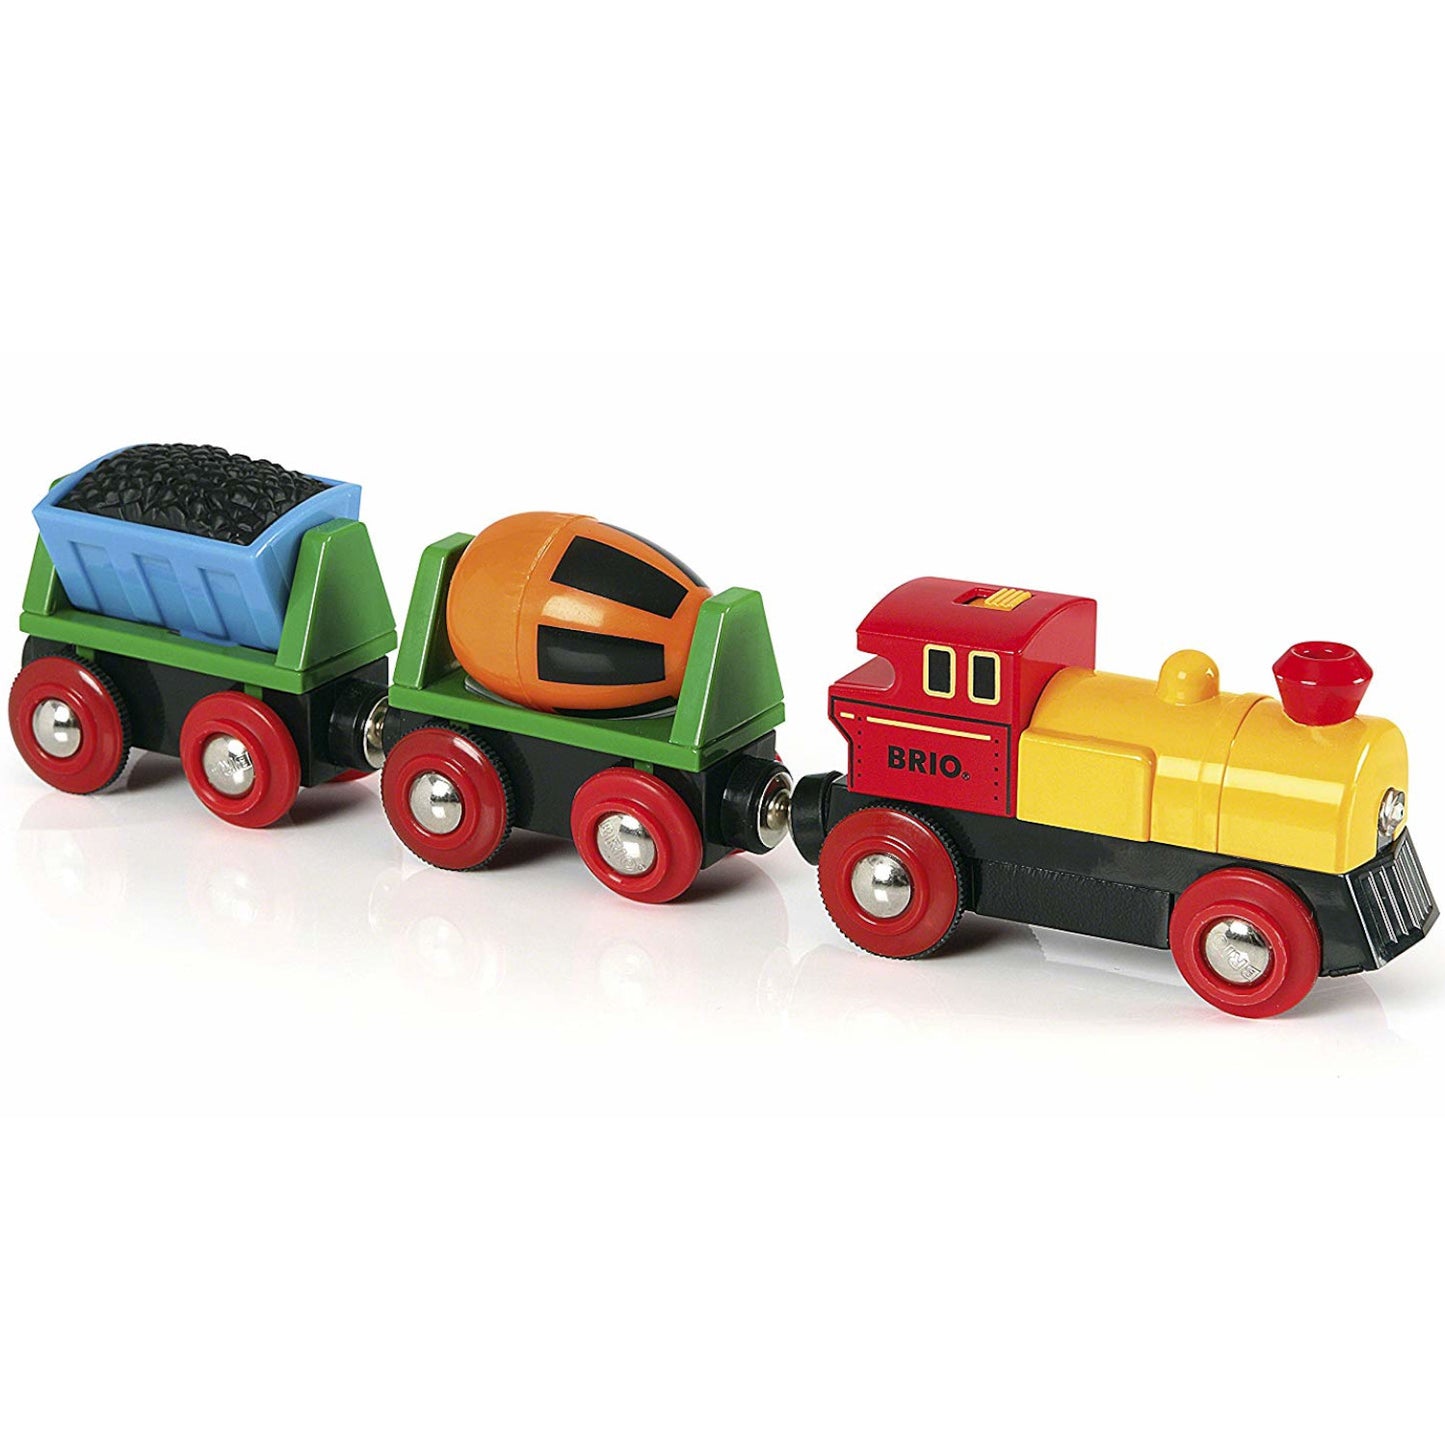 Brio Battery Operated Action Train 1